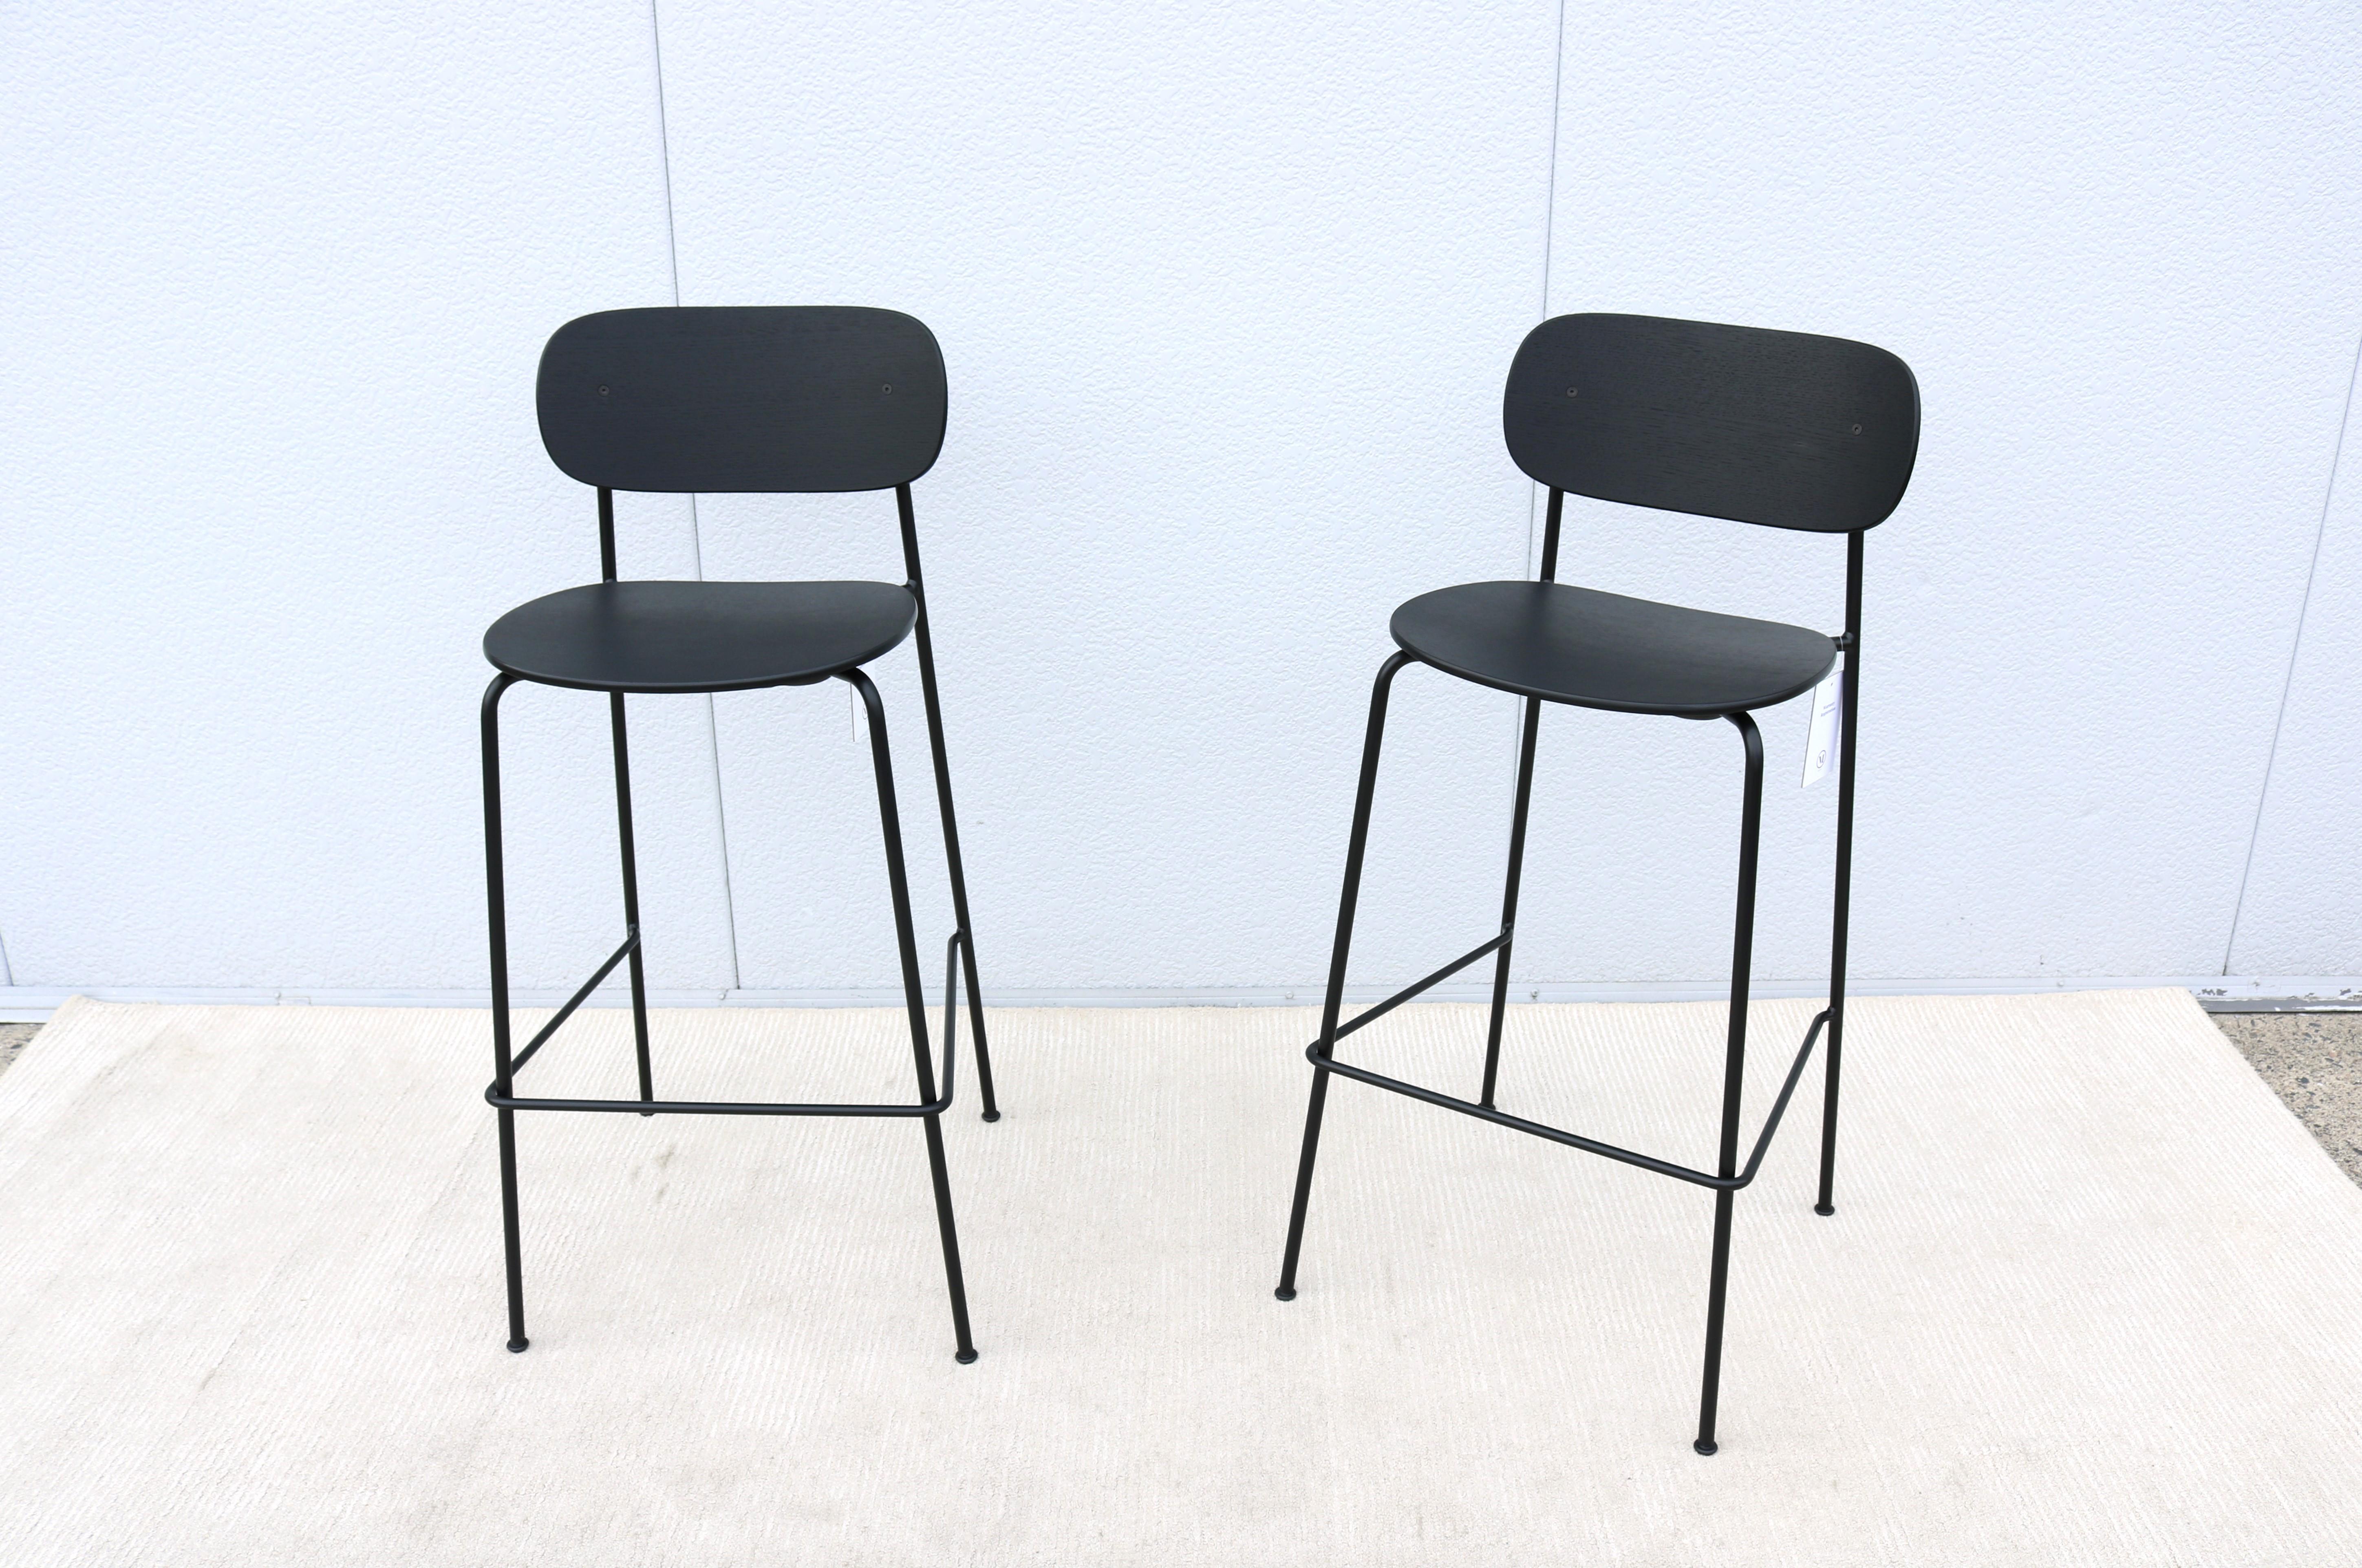 These elegant Co Bar height stools are comfortable and well-crafted.
Distinguished by its wide back, generous seat and slender steel frame, creates an intriguing geometric silhouette.
Designed in collaboration with Norm Architects and Els Van